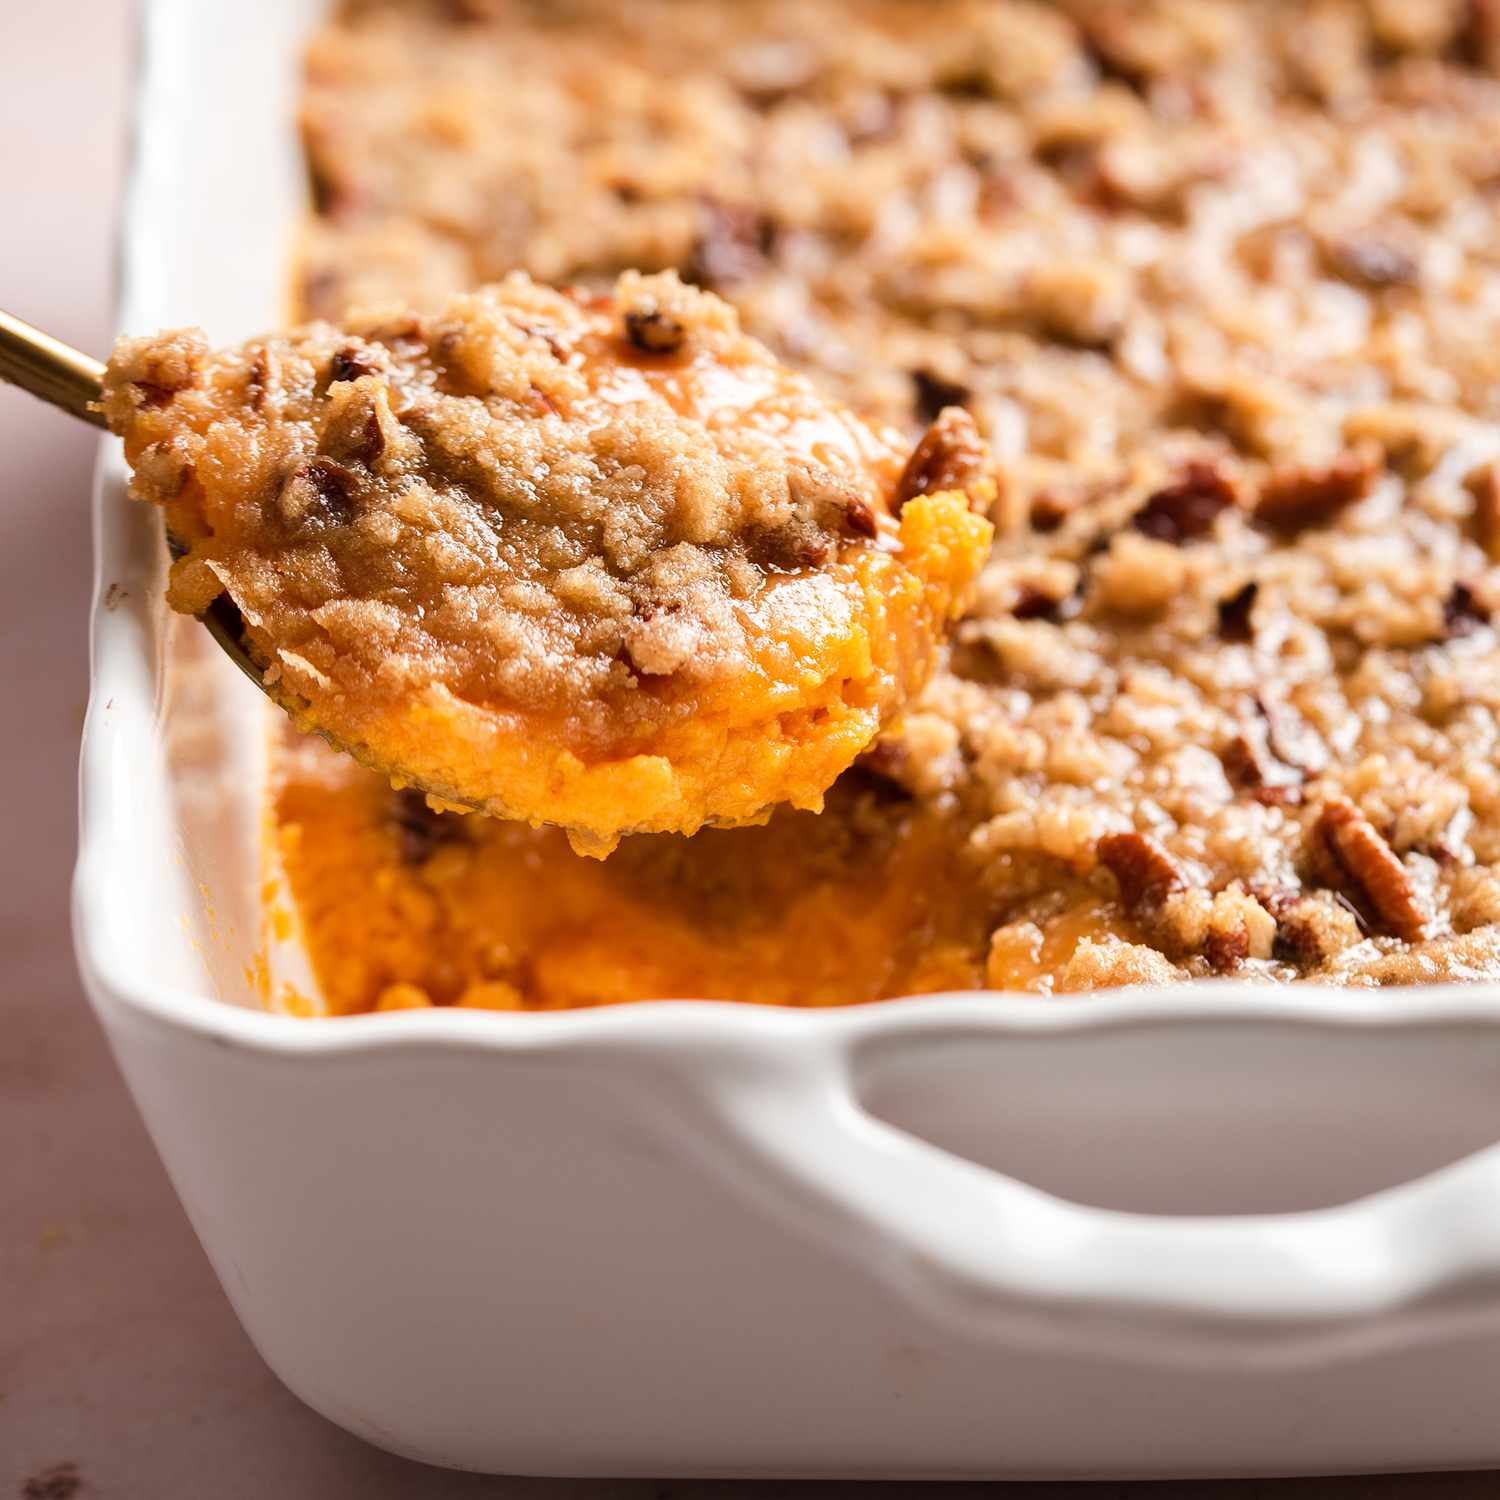 a close up view of a spoonful of sweet potato casserole, topped with pecans and brown sugar, being lifted from a white baking dish.